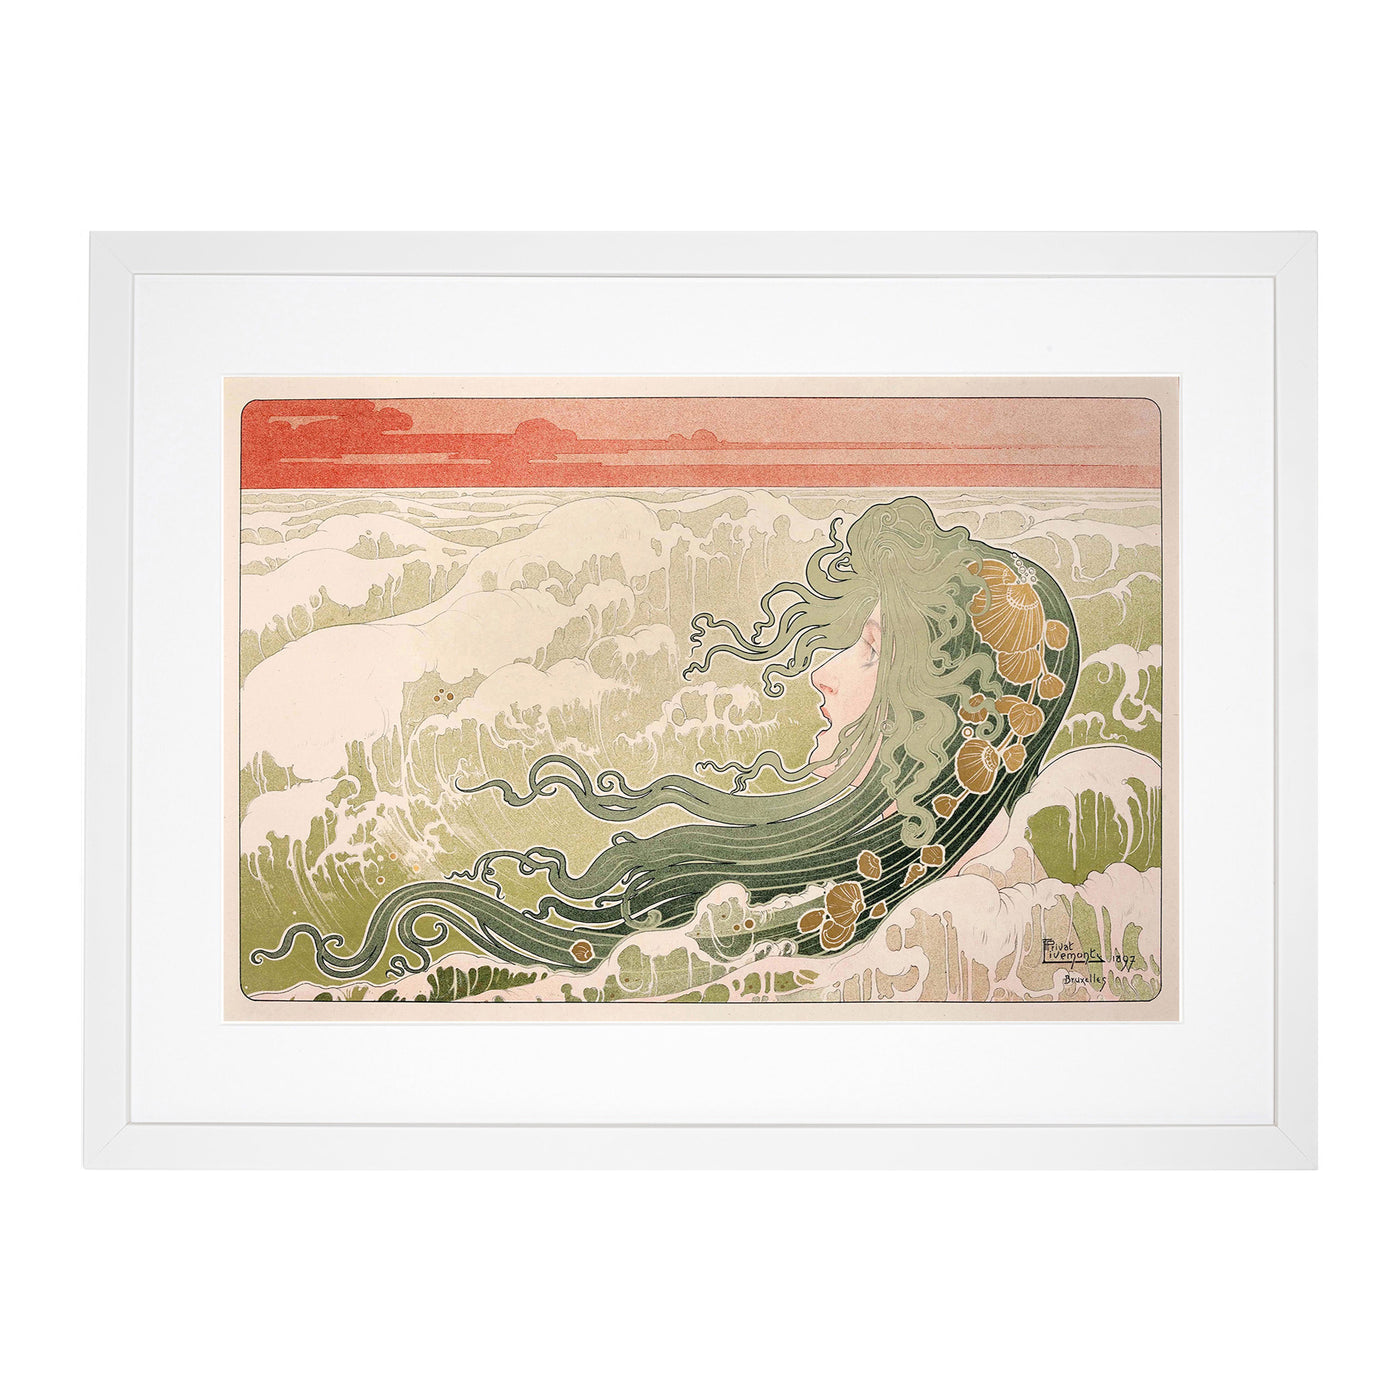 The Wave By Henri Privat Livemont